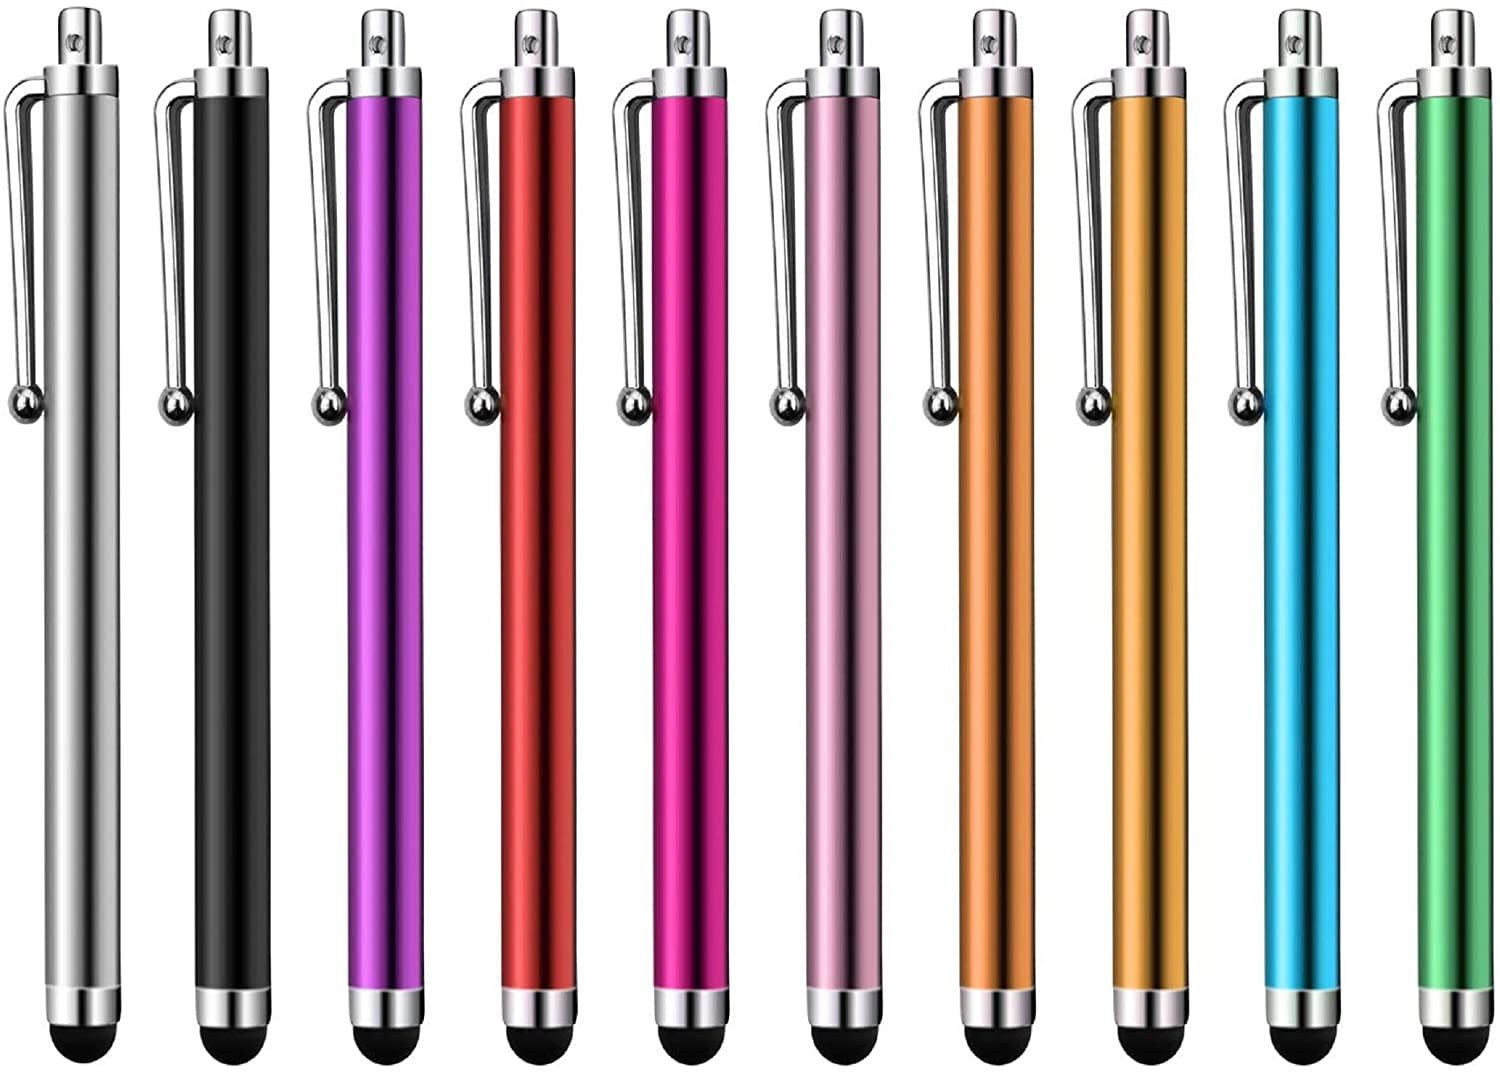 Stylus Pens for Touch Screens Devices iPad Black Tablet Stylus Pen Set of 36 for Universal Capacitive Touch Screens Devices Compatible with iPhone 